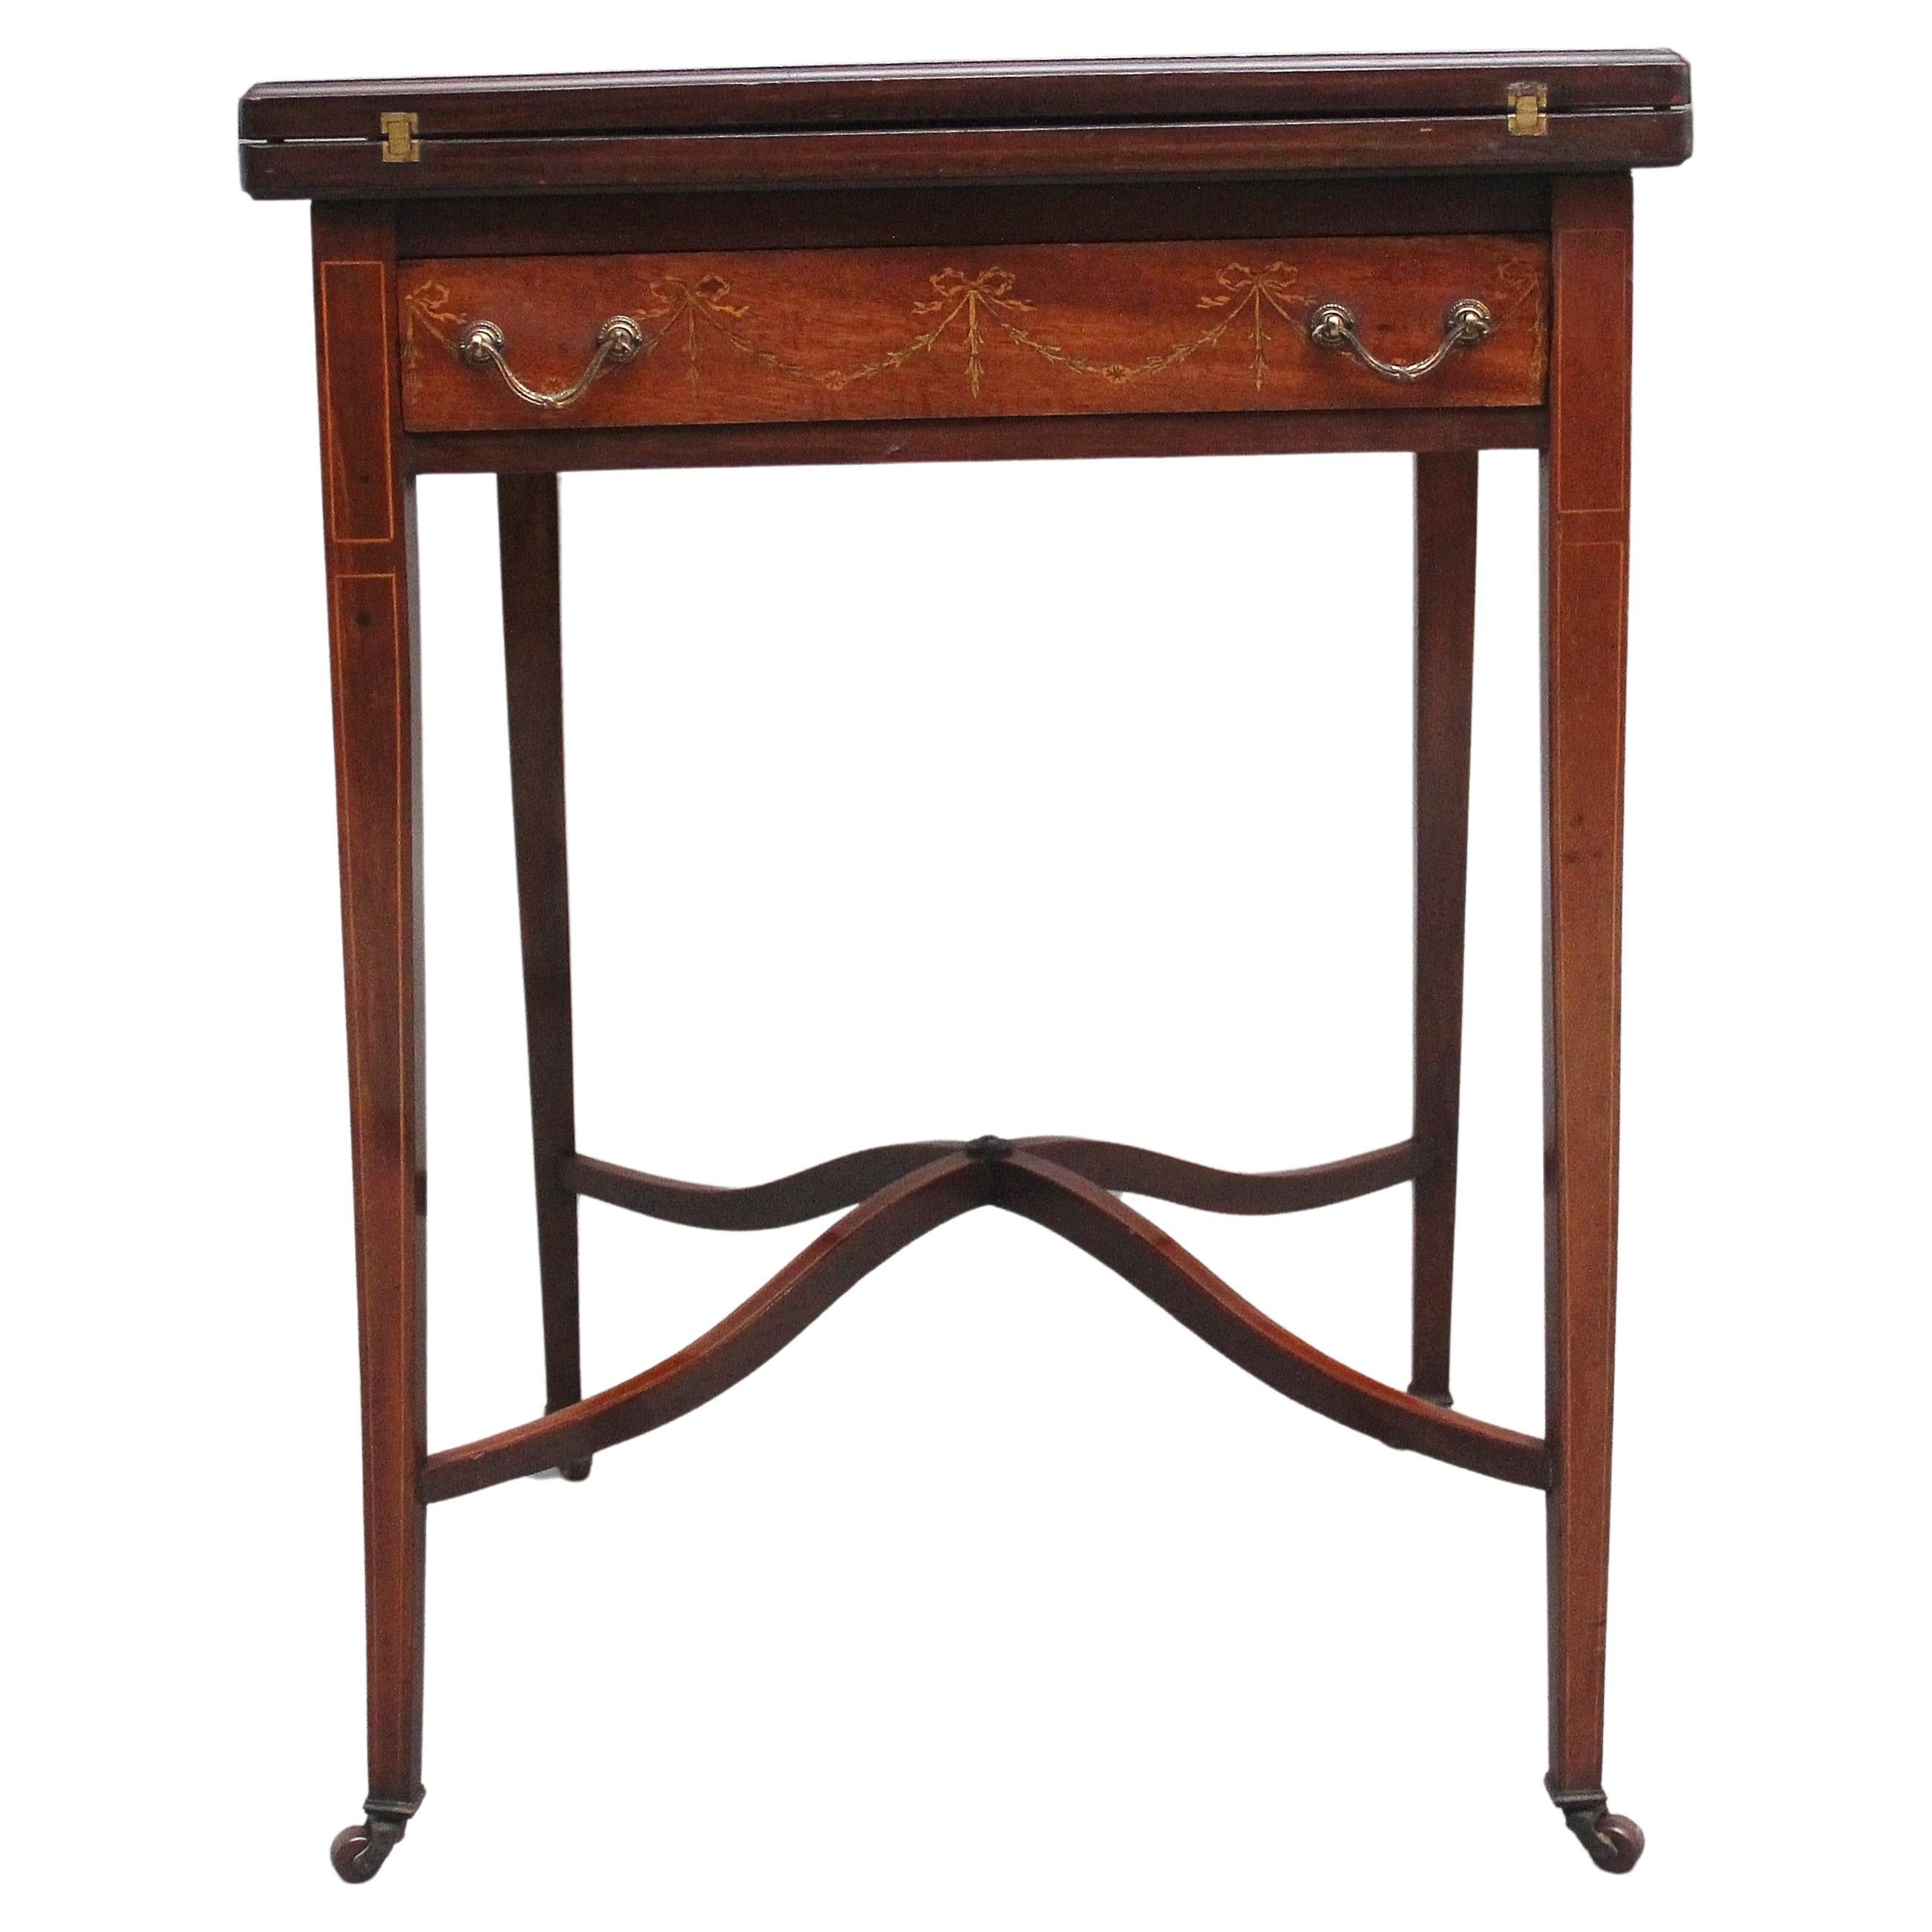 Early 20th Century mahogany and inlaid card table